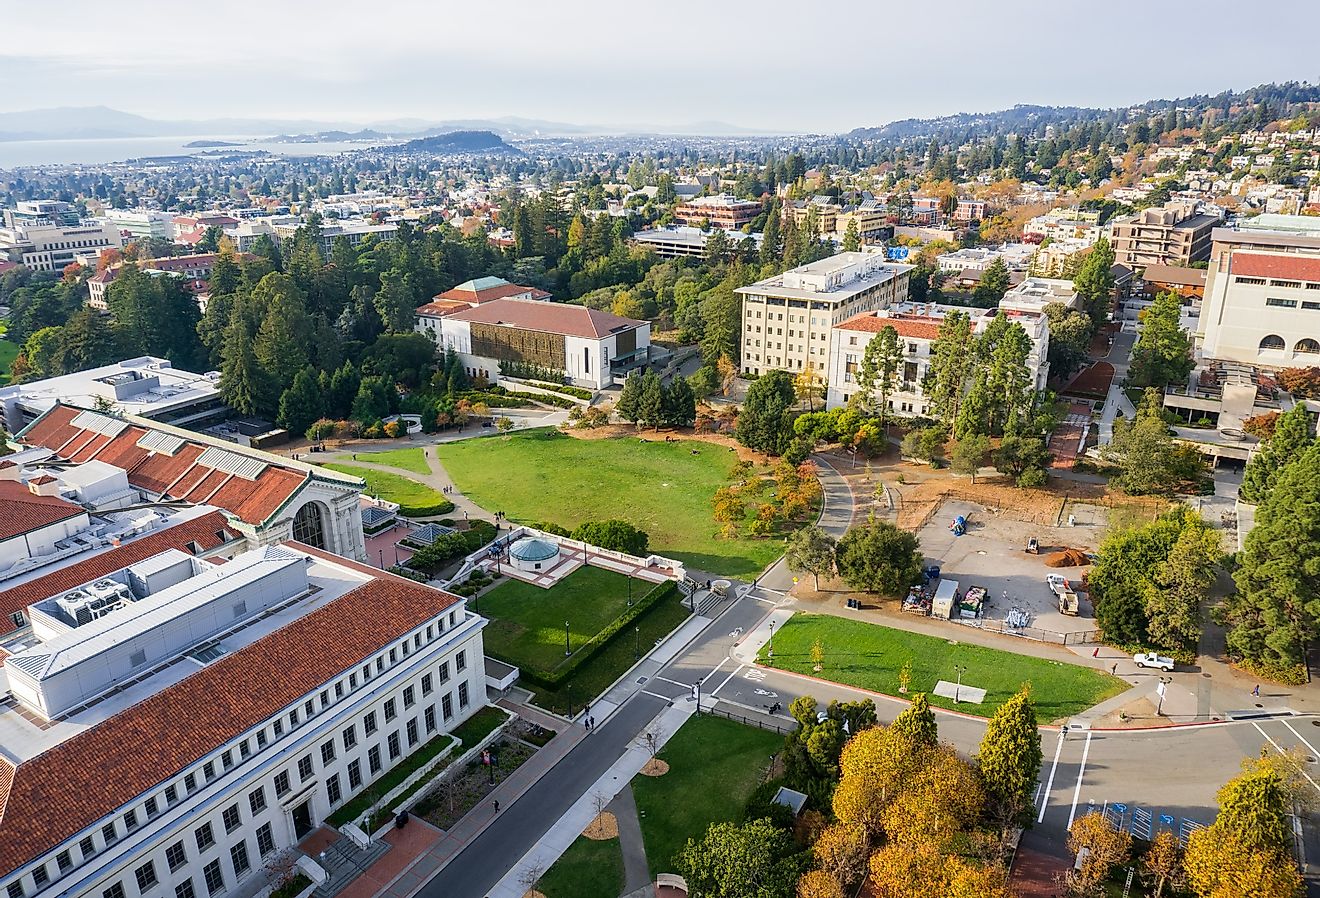 Aerial view of buildings in University of California, Berkeley campus on a sunny autumn day, view towards Richmond and the San Francisco bay shoreline in the background.